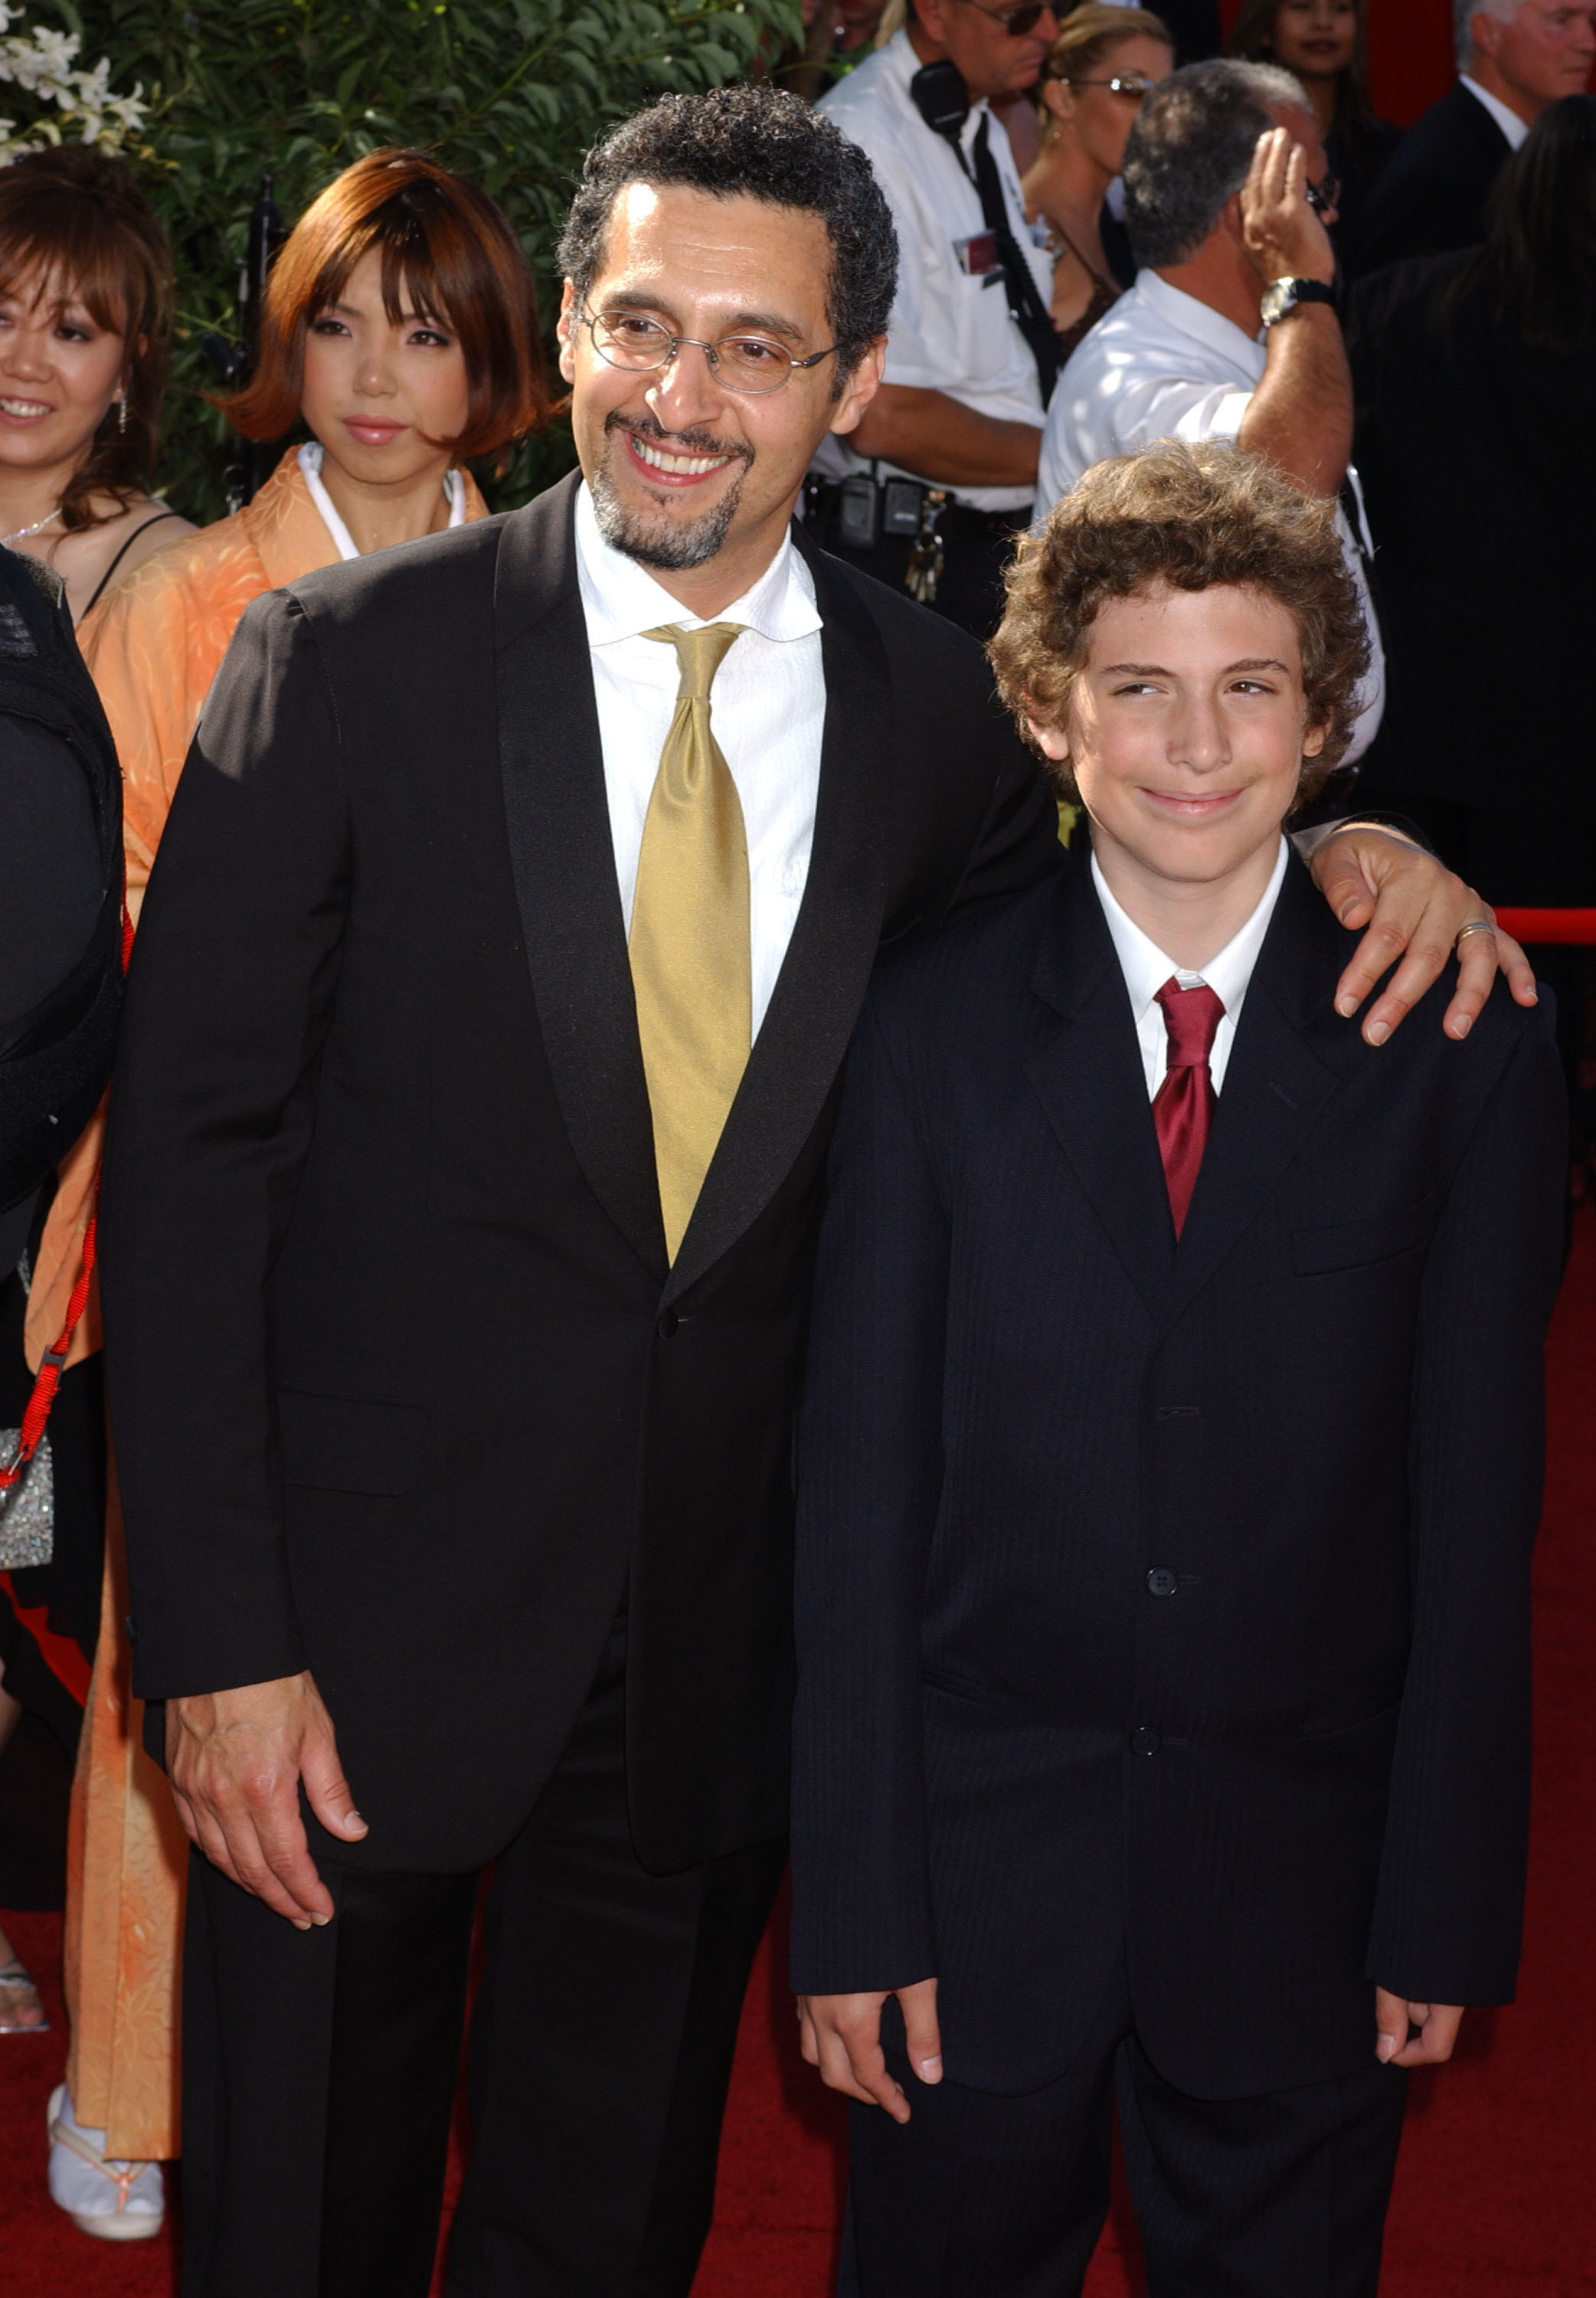 John Turturro with his young son